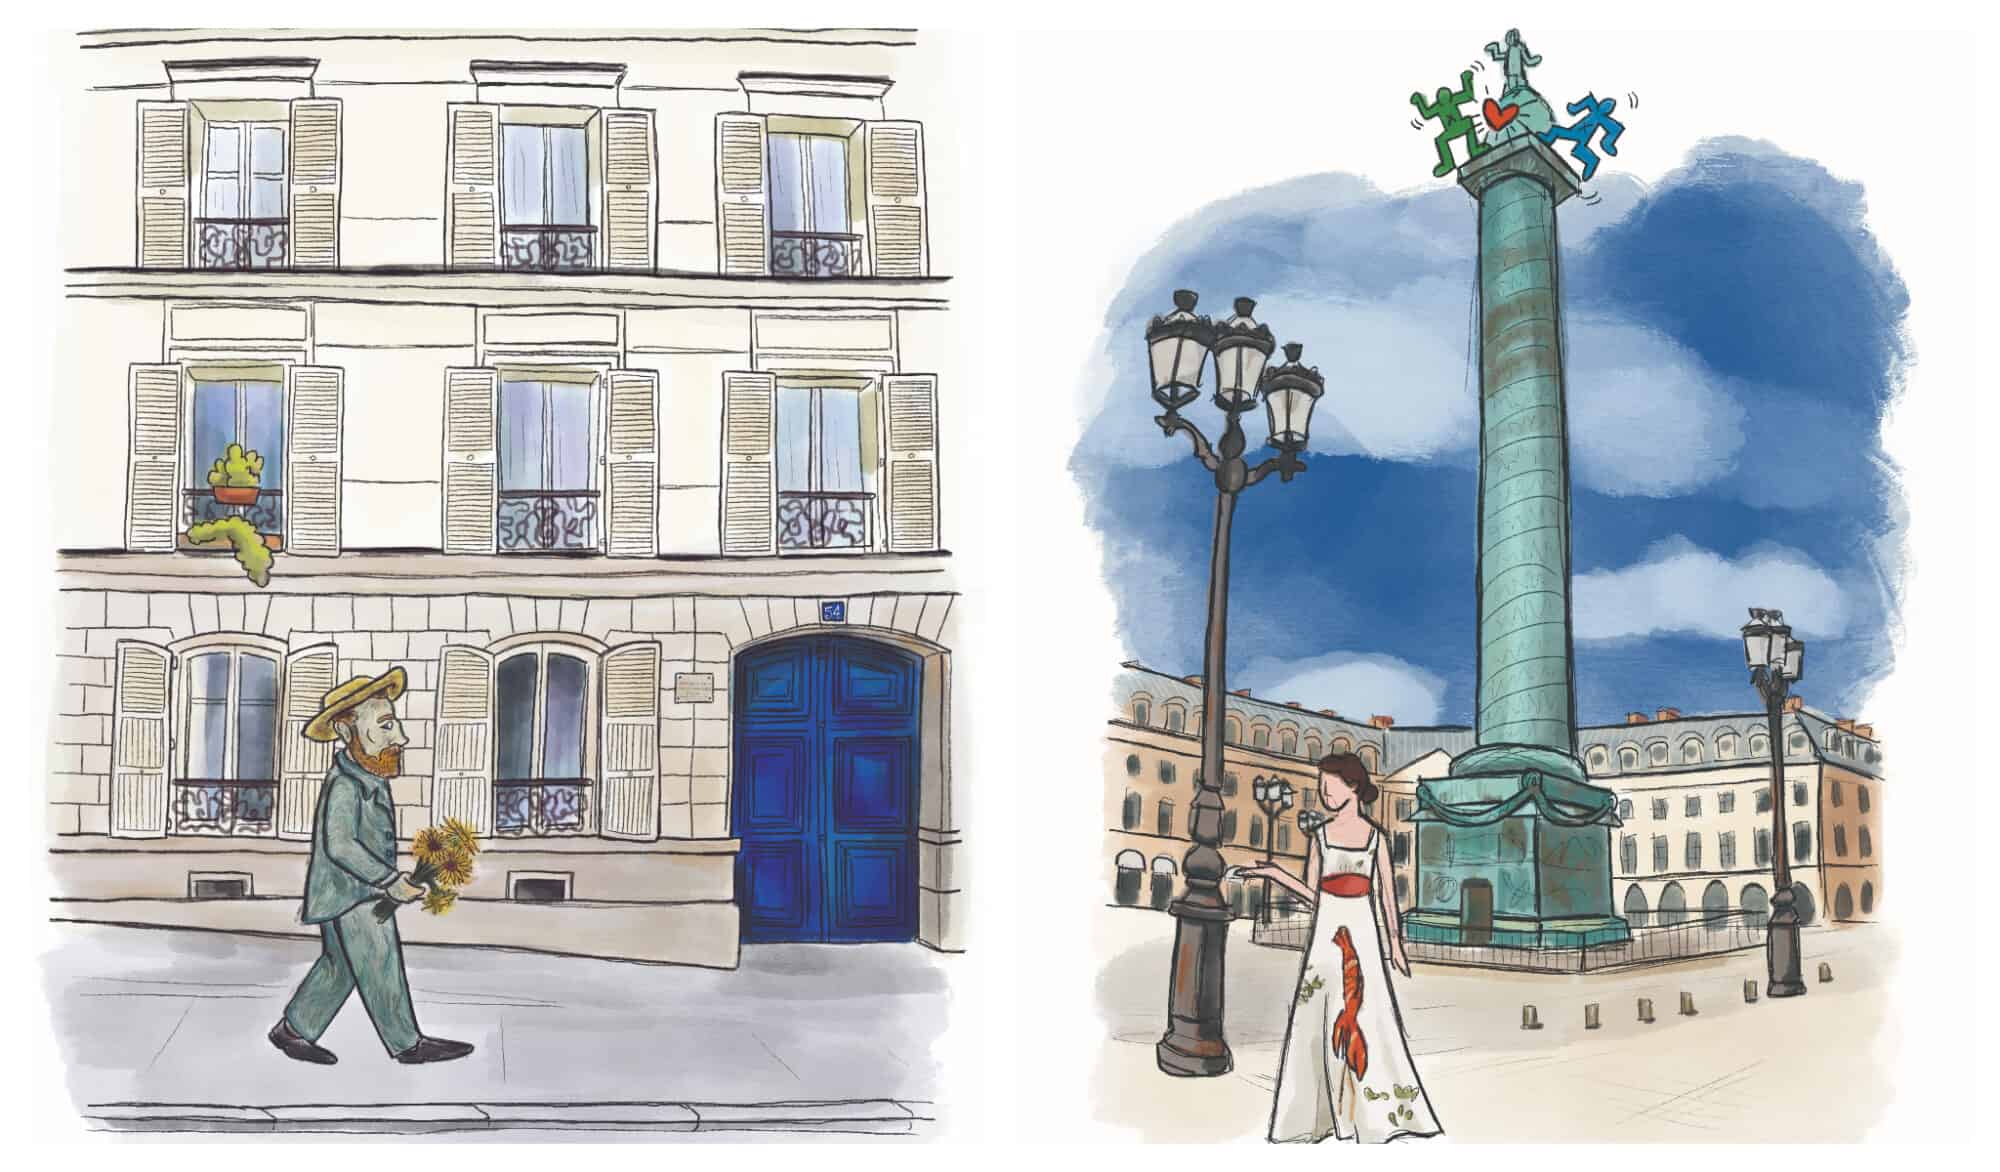 Left: an illustration of the artist Vincent van Gogh walking past his Montmartre apartment building with a blue door. Right: A lady in a white and red dress stands before the Place Vendome tower.